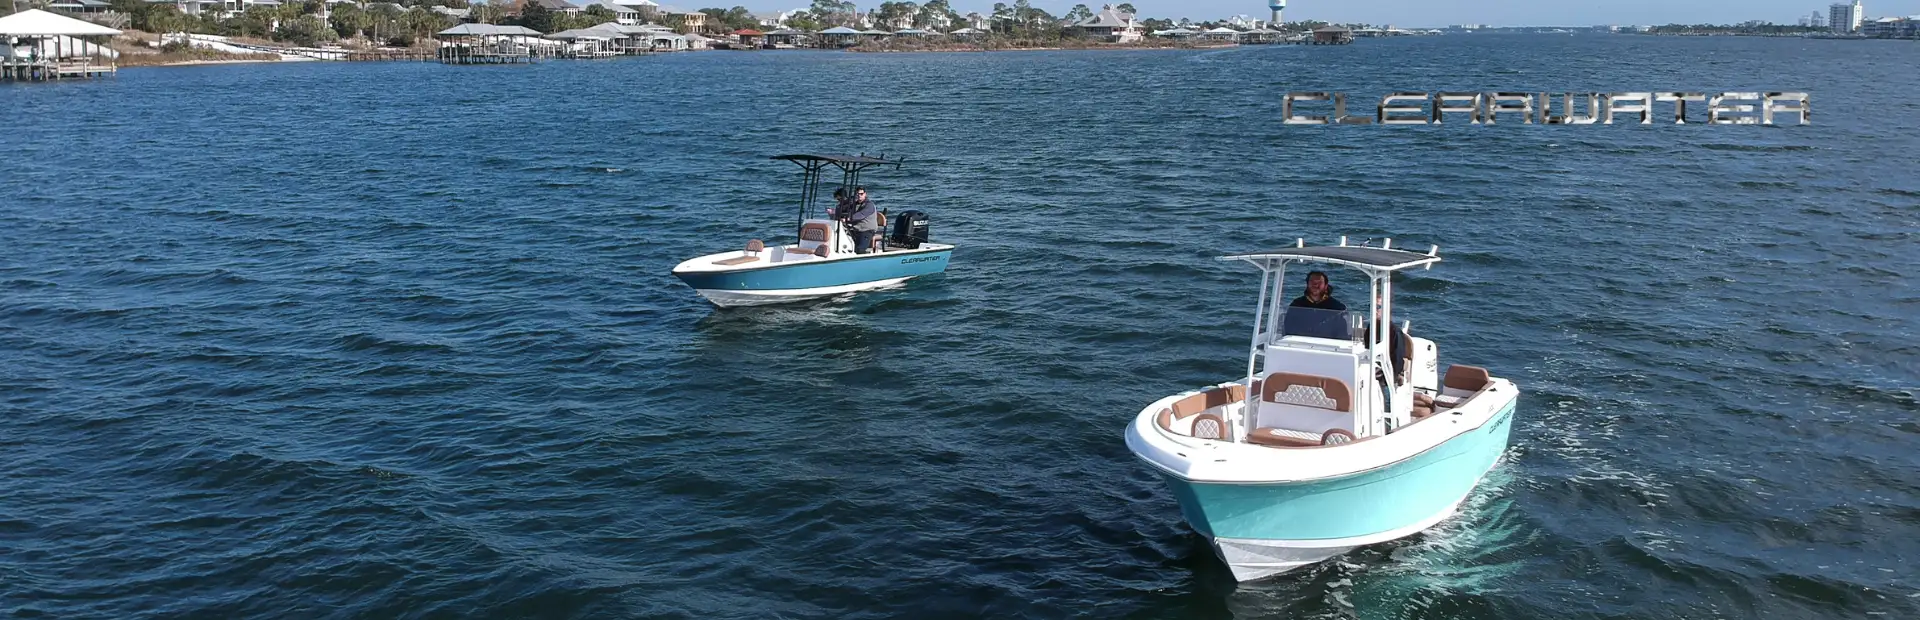 Clearwater Boats for sale